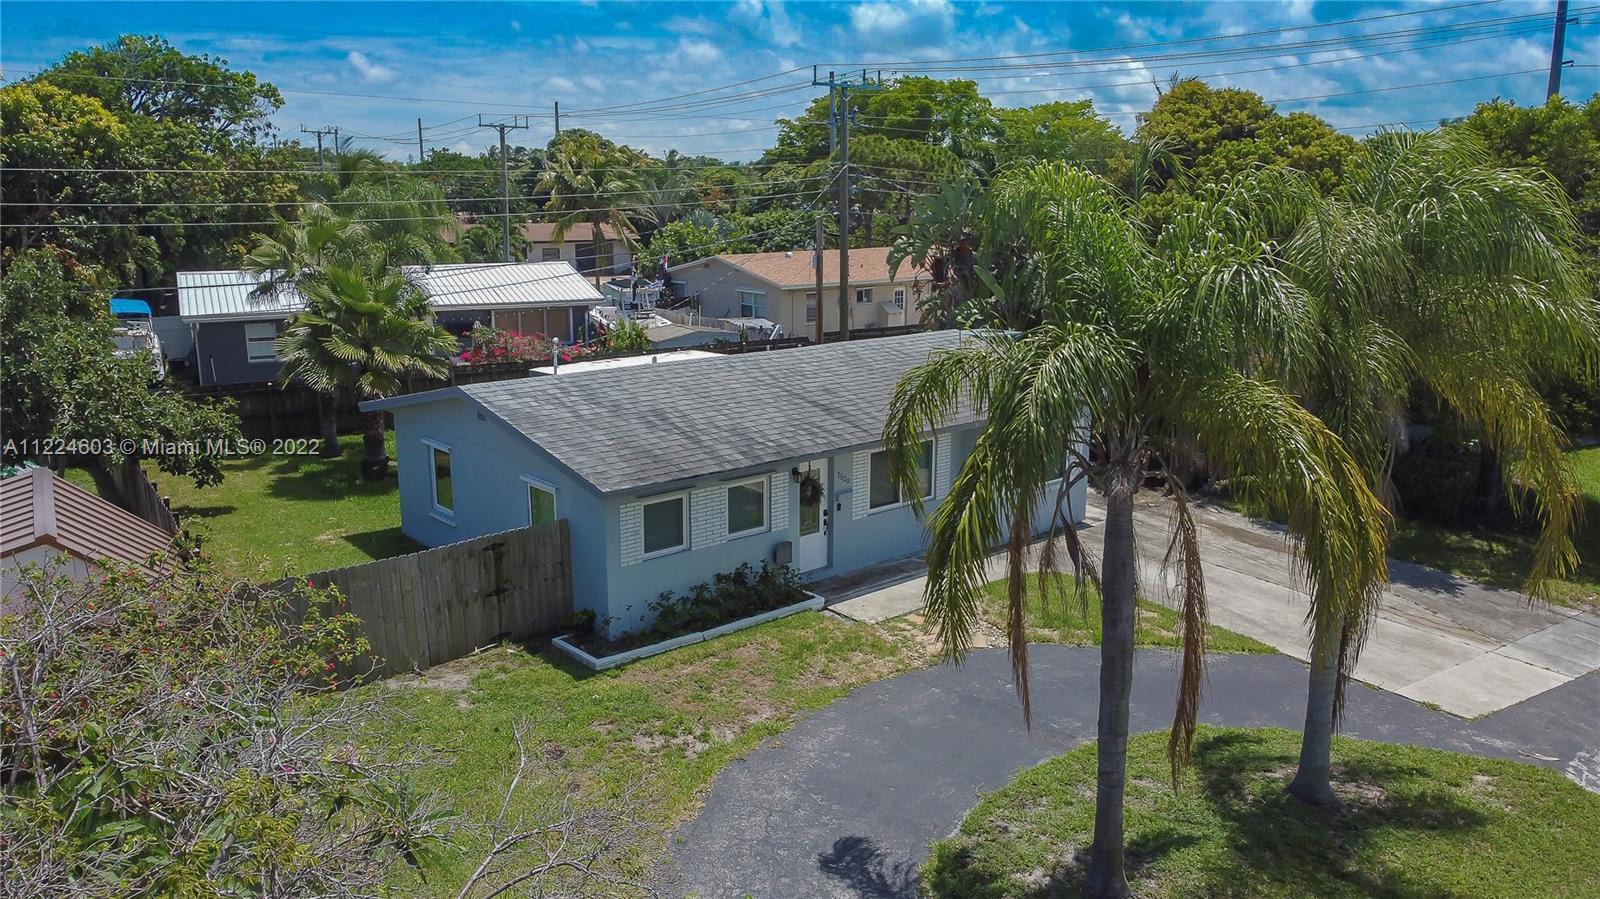 Exciting opportunity to own a beautiful beach cottage in the Cresthaven community of Pompano.  This 